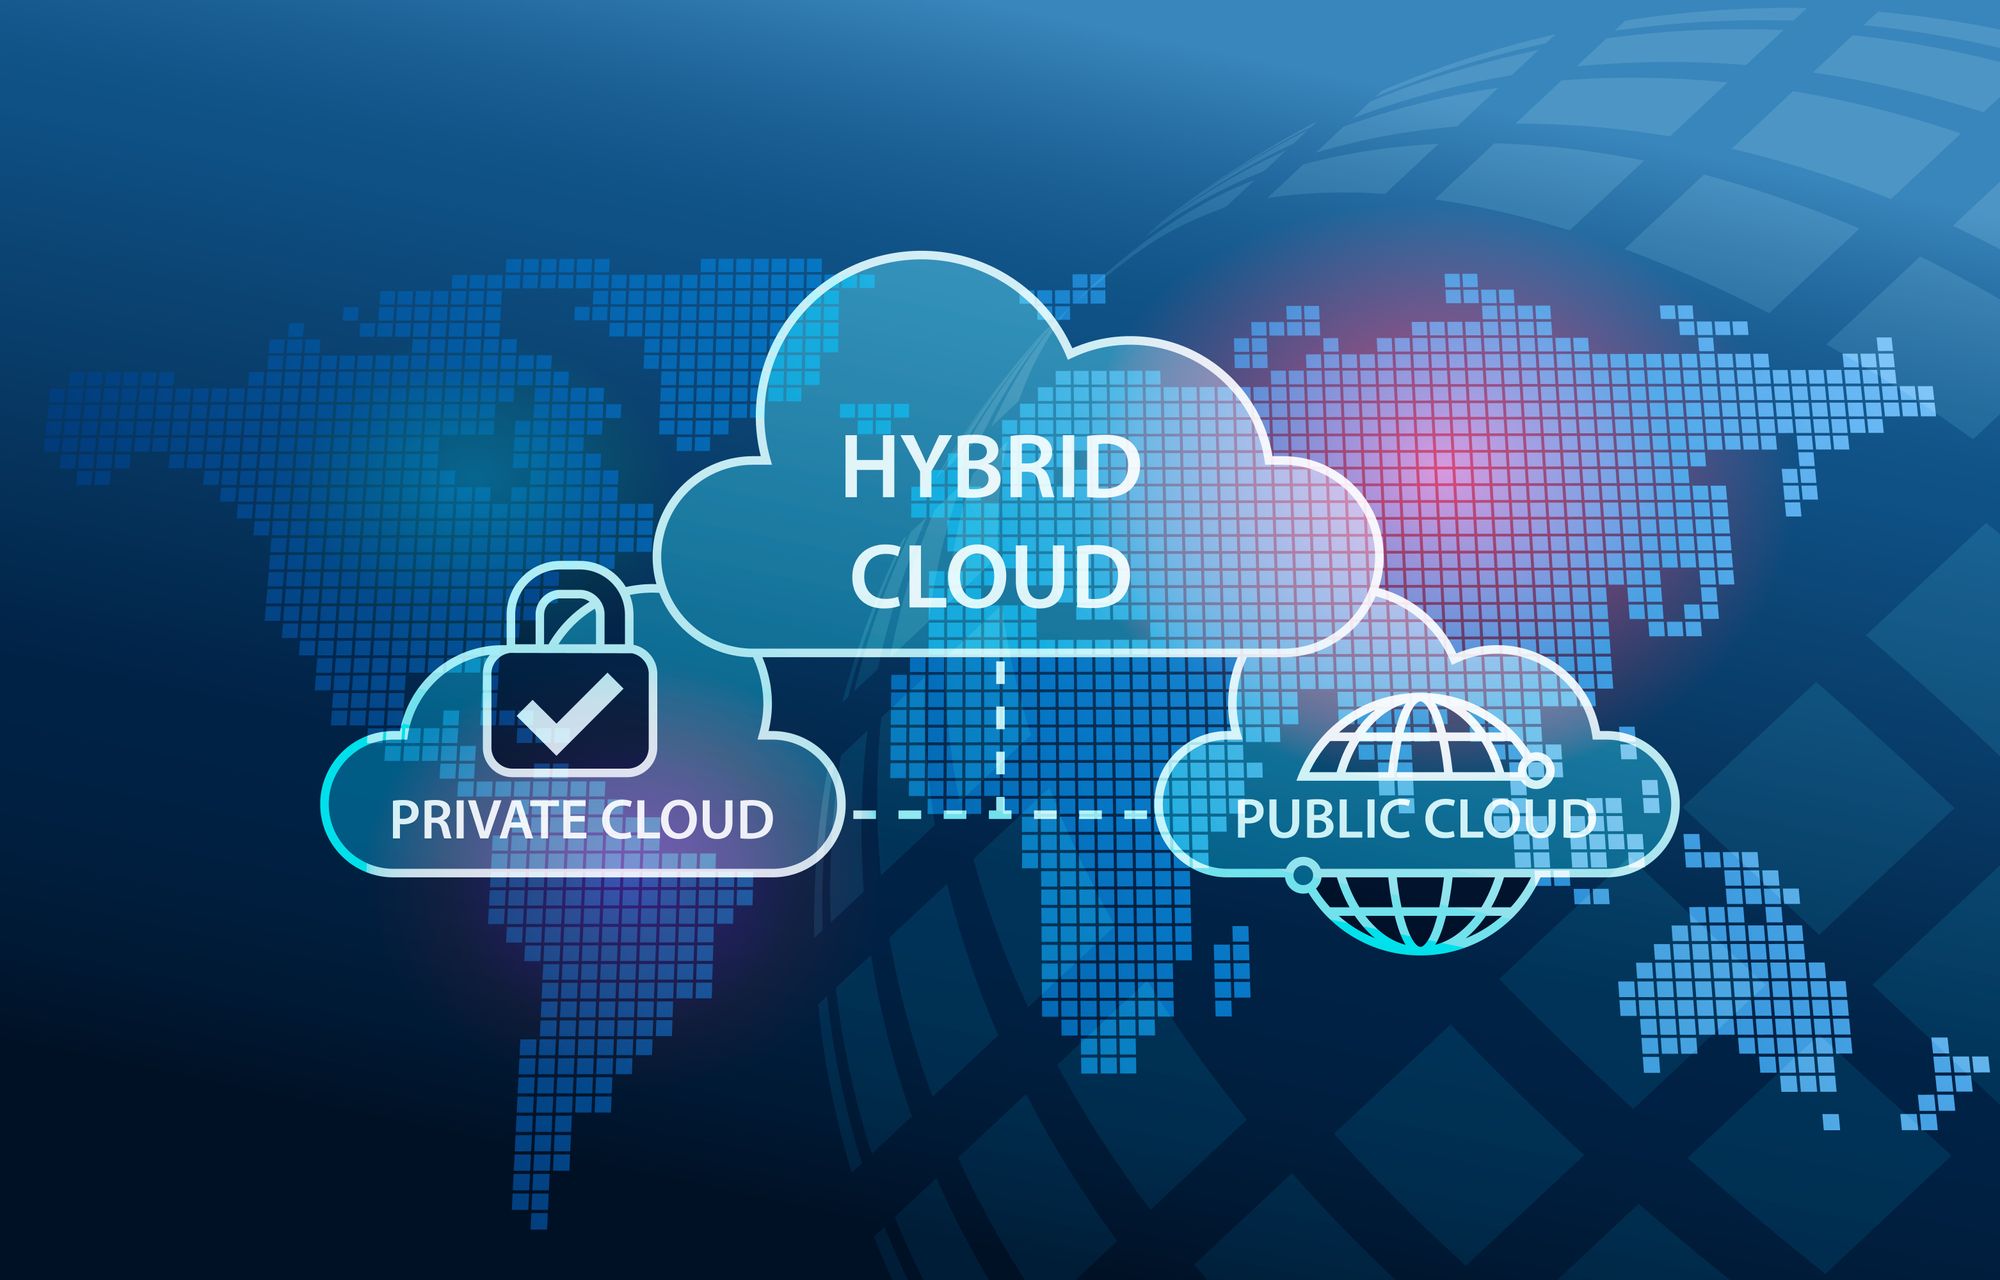 Current Hybrid Cloud Computing Trends